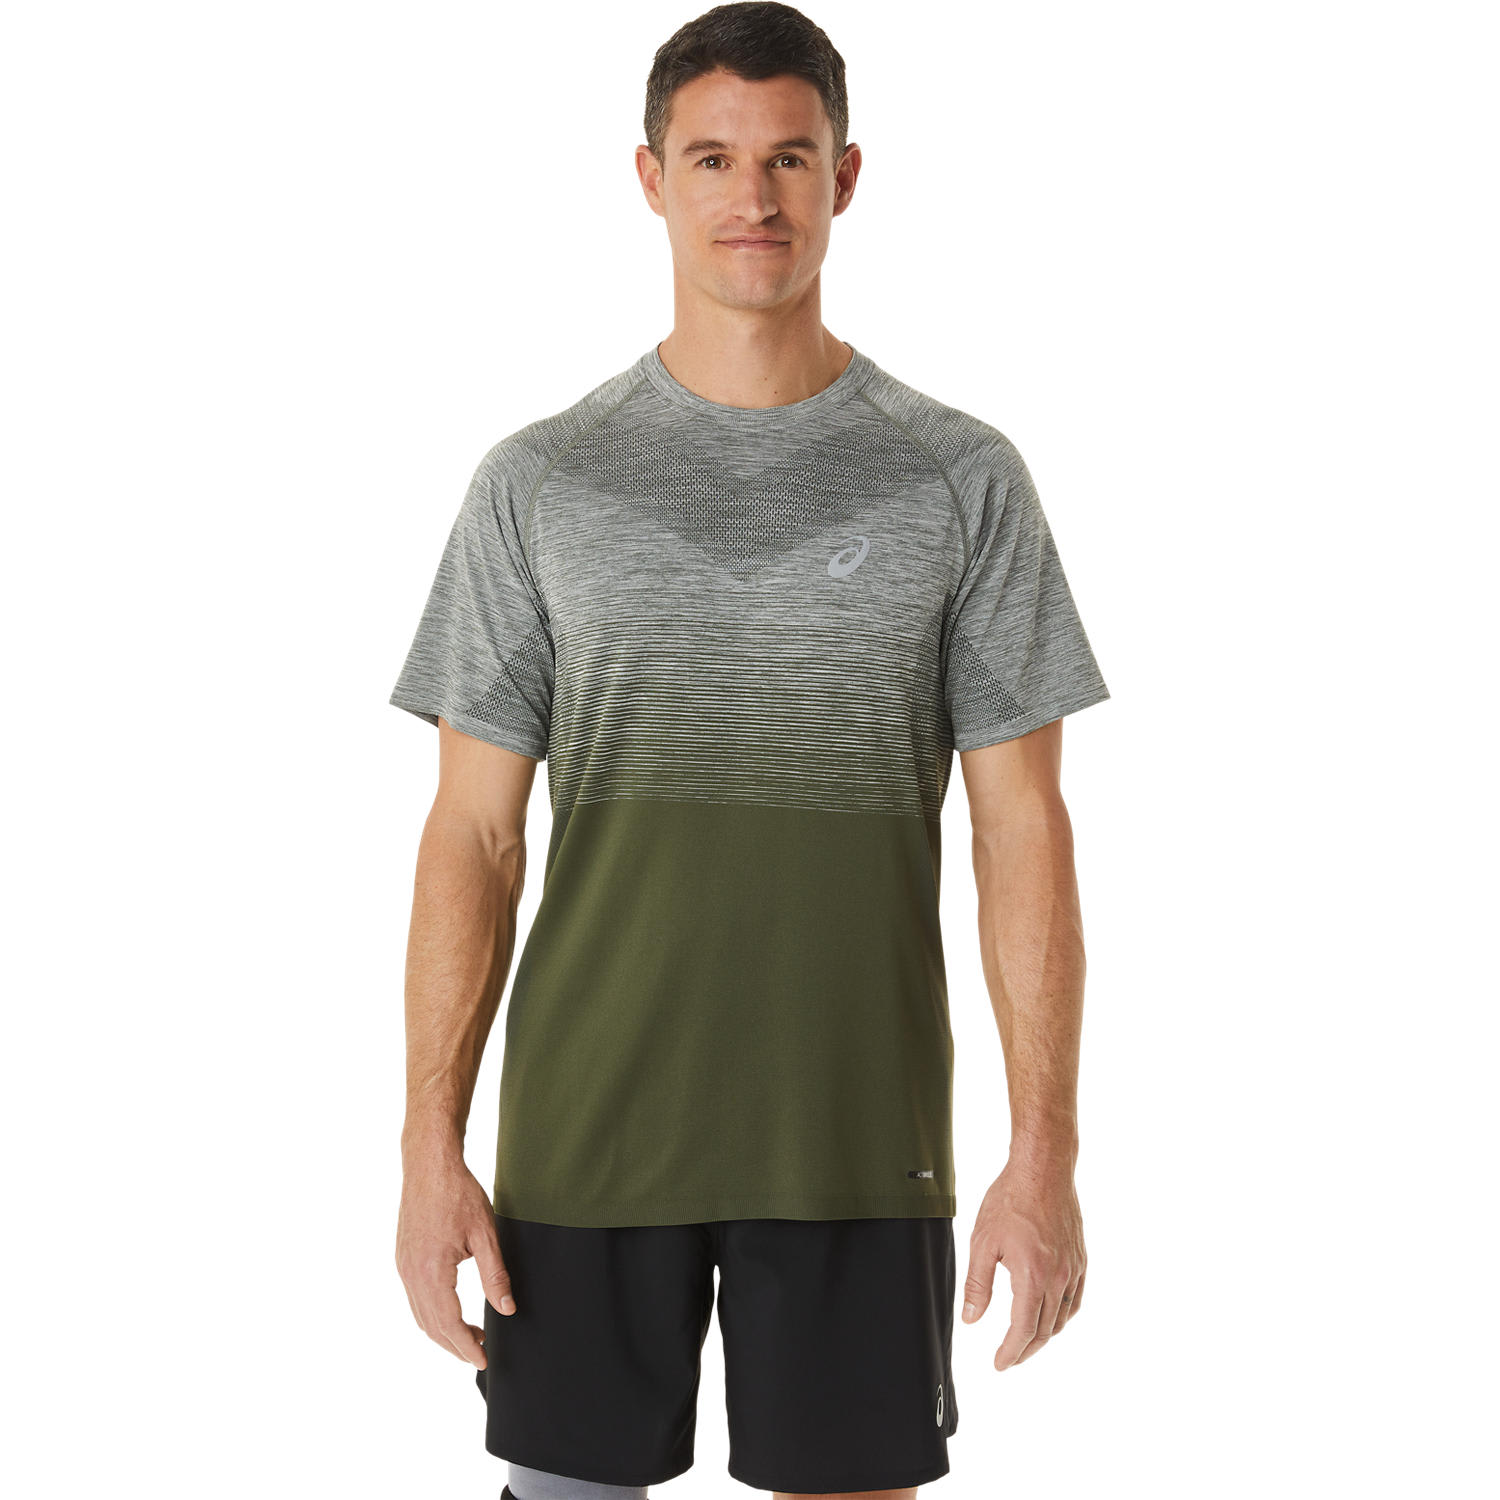 Buy Asics Men's Seamless SS Top from Outnorth